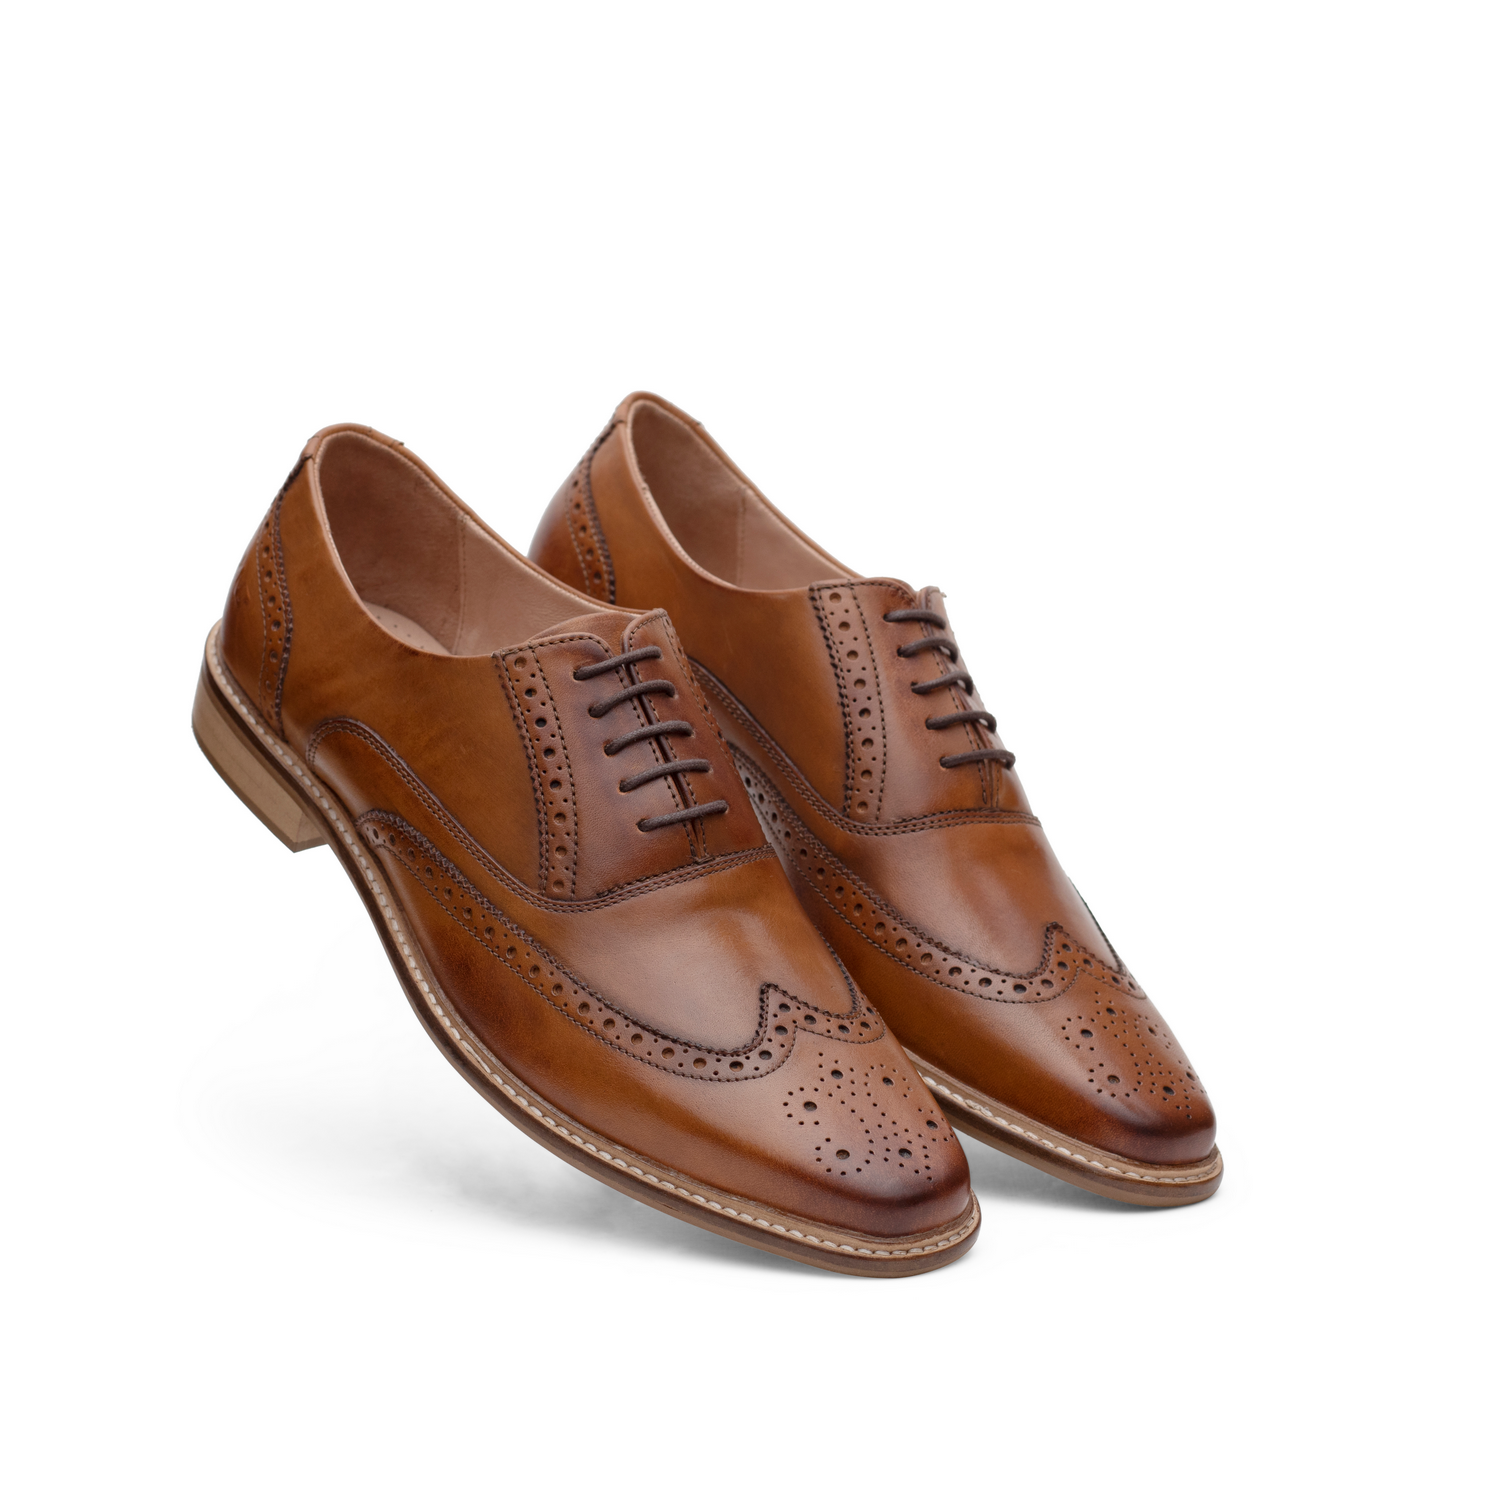 Oxford Tan Formal Shoes - MNJ Shoes - Brand New Shoes and Bags Online Store